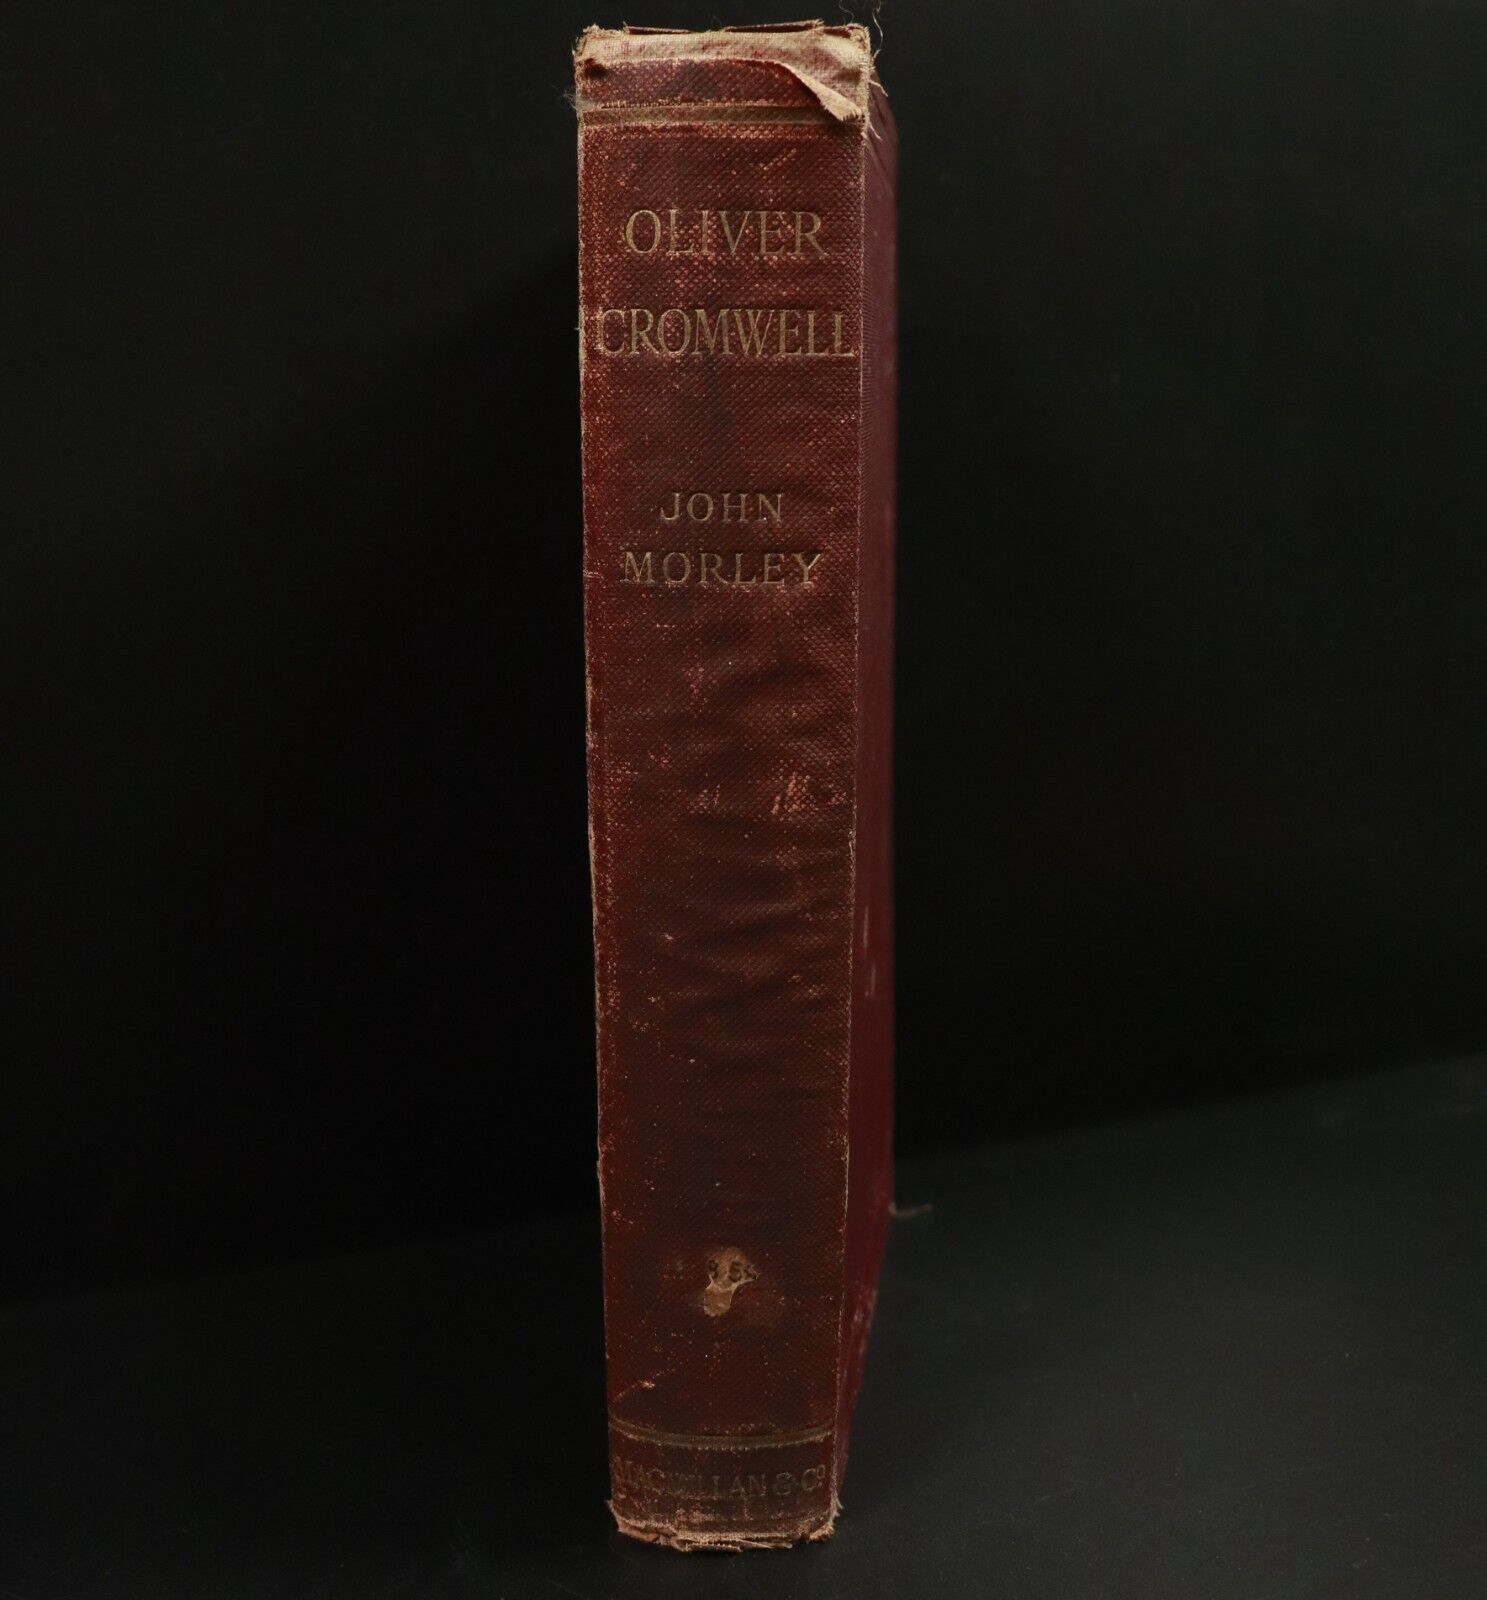 1901 Oliver Cromwell by John Morley Antique British History Book